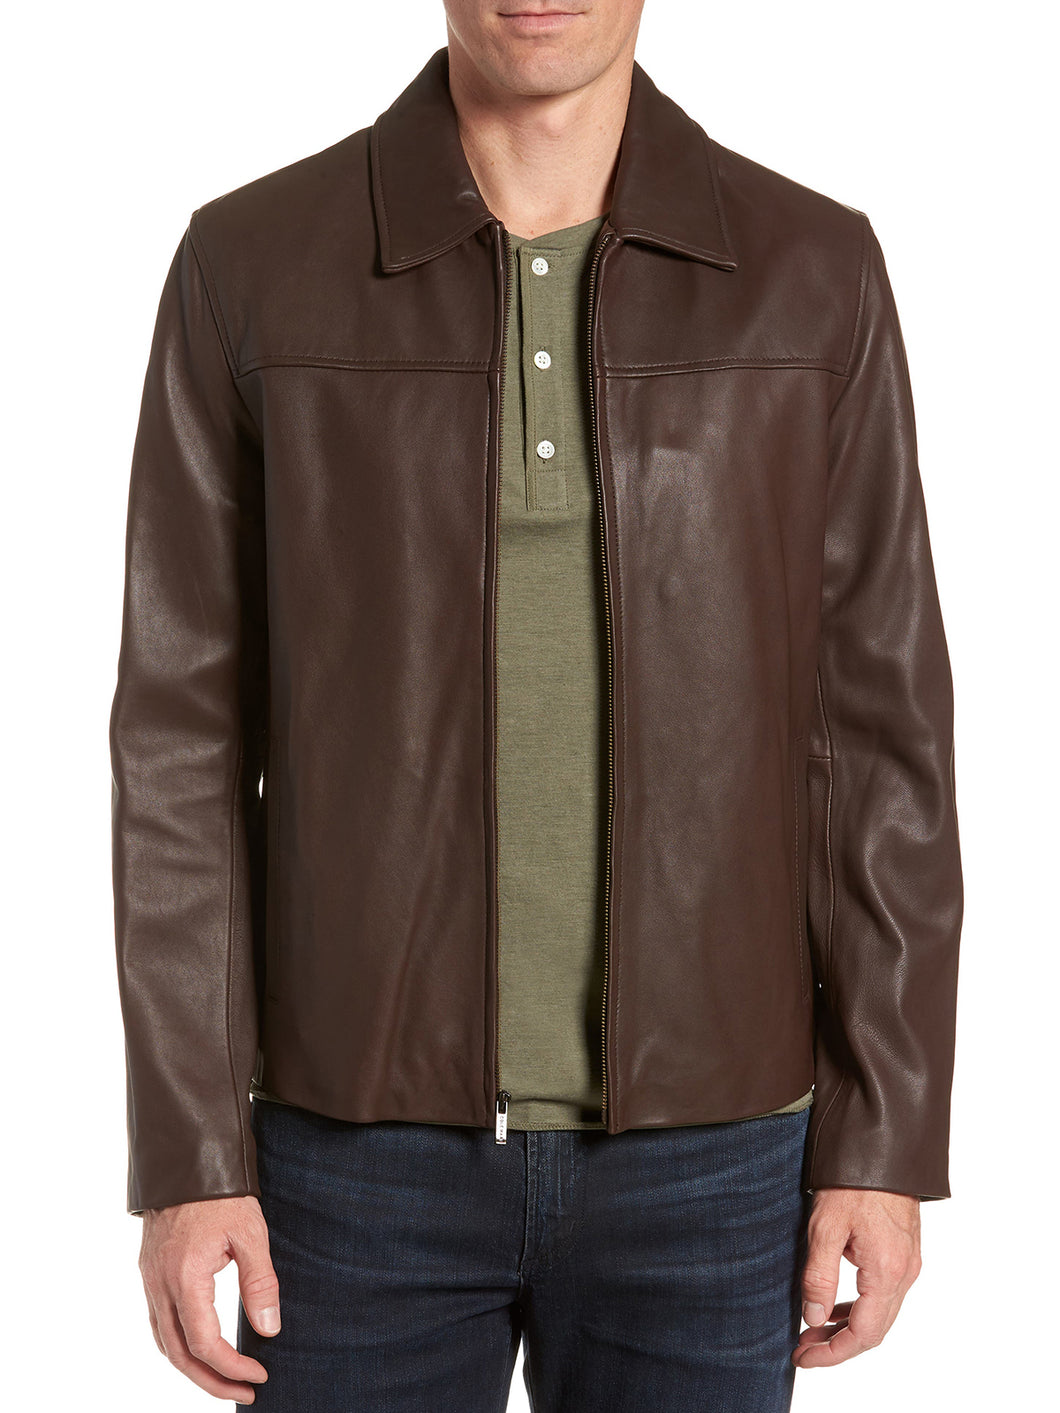 Mens Stand Collar Brown Leather Jacket